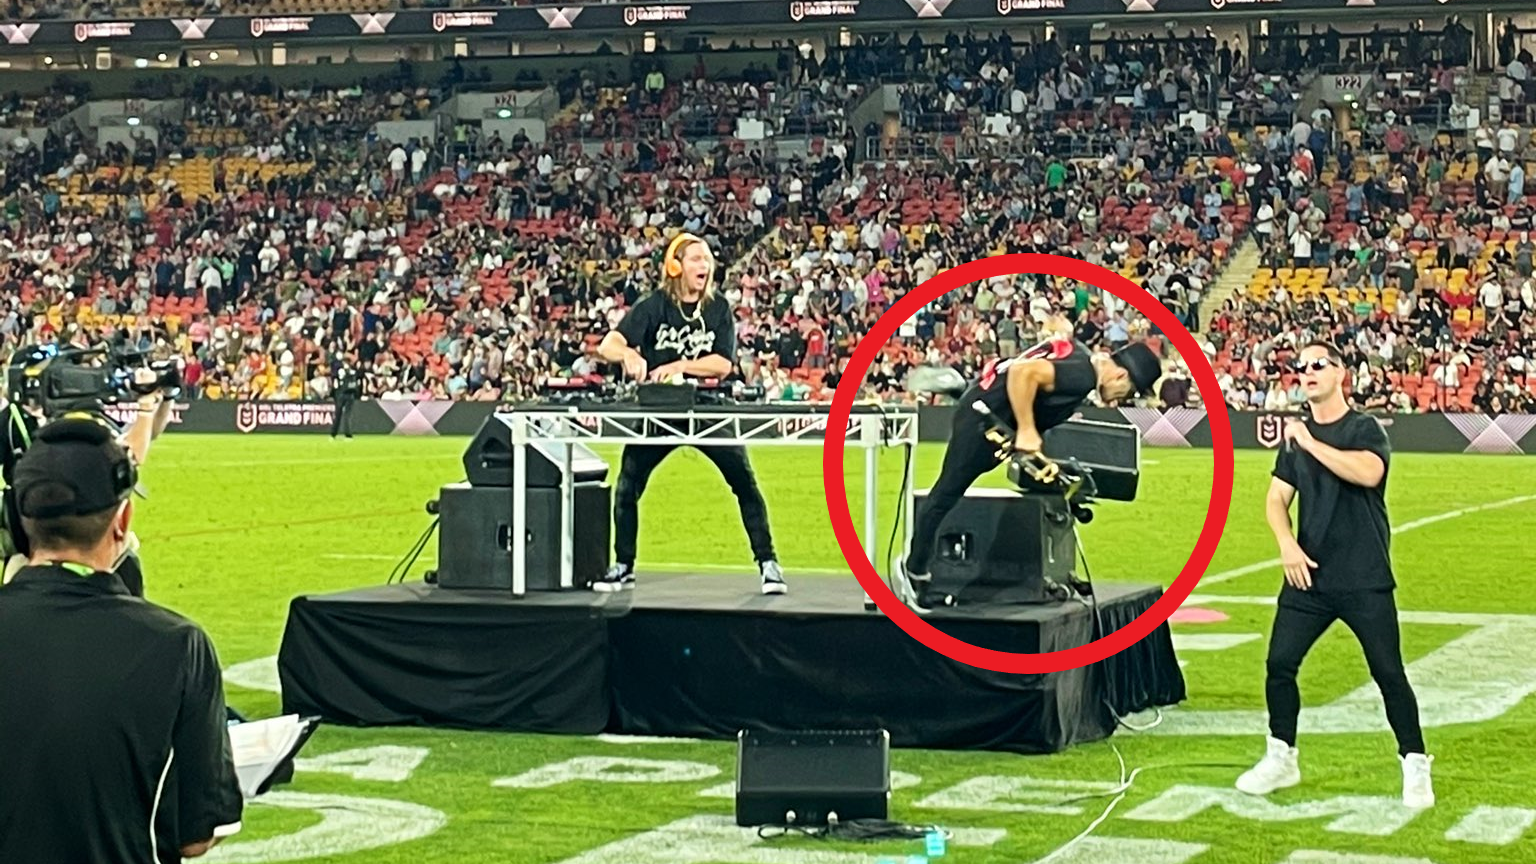 Timmy Trumpet takes a tumble off the stage.